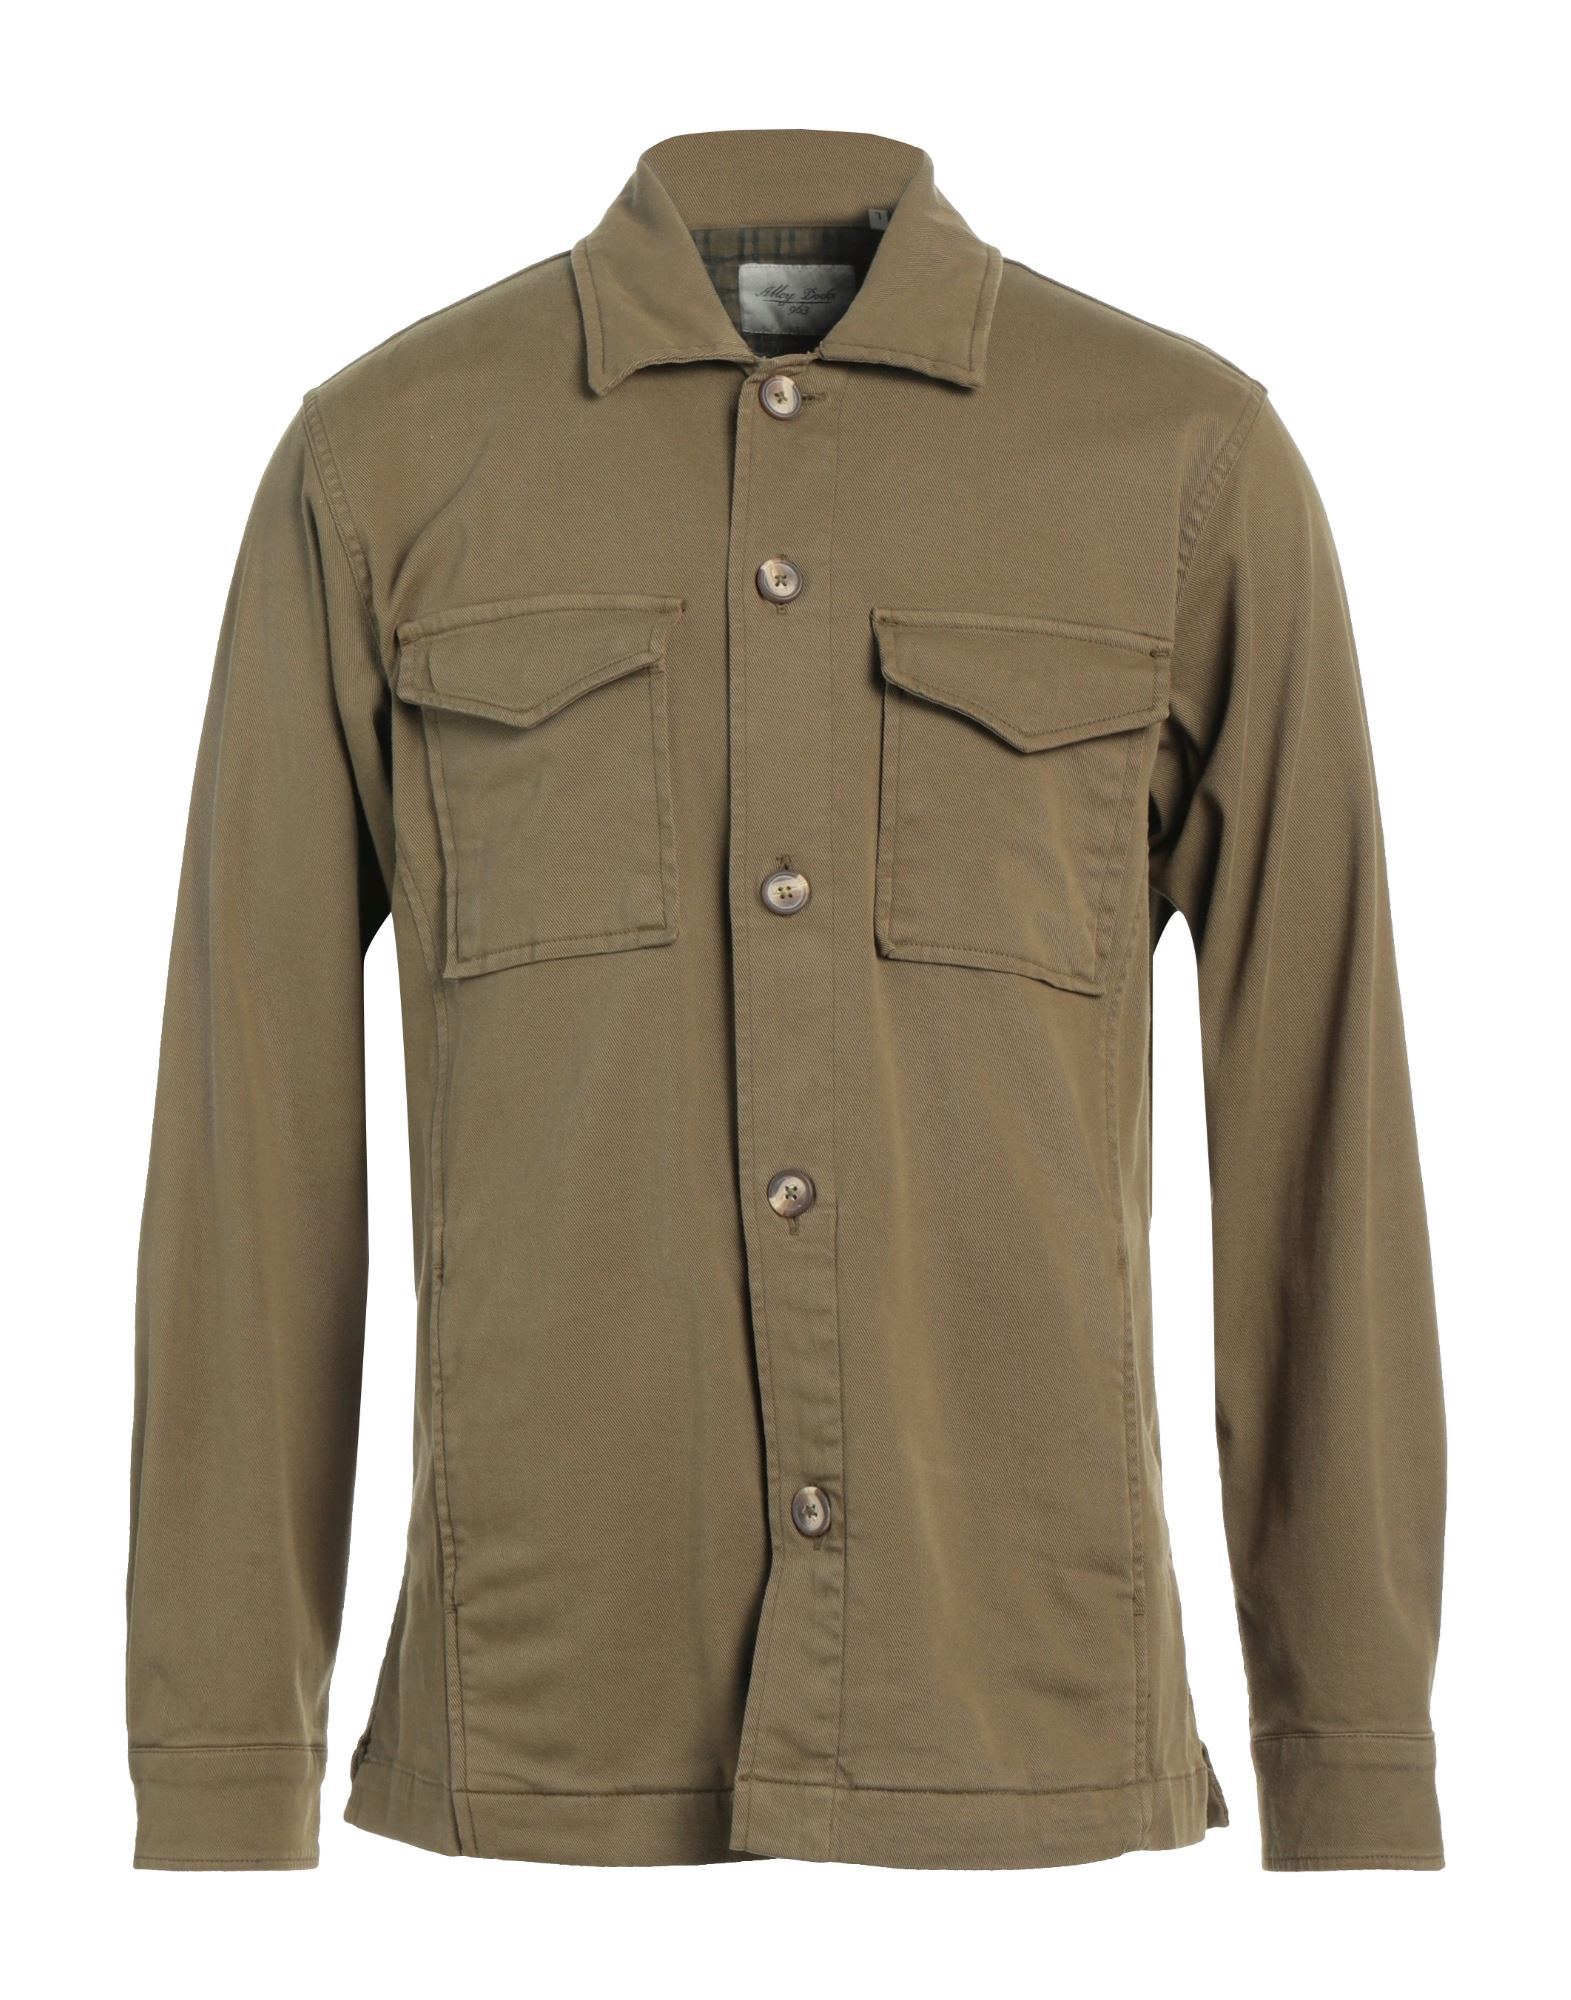 Alley Docks 963 Shirts In Military Green